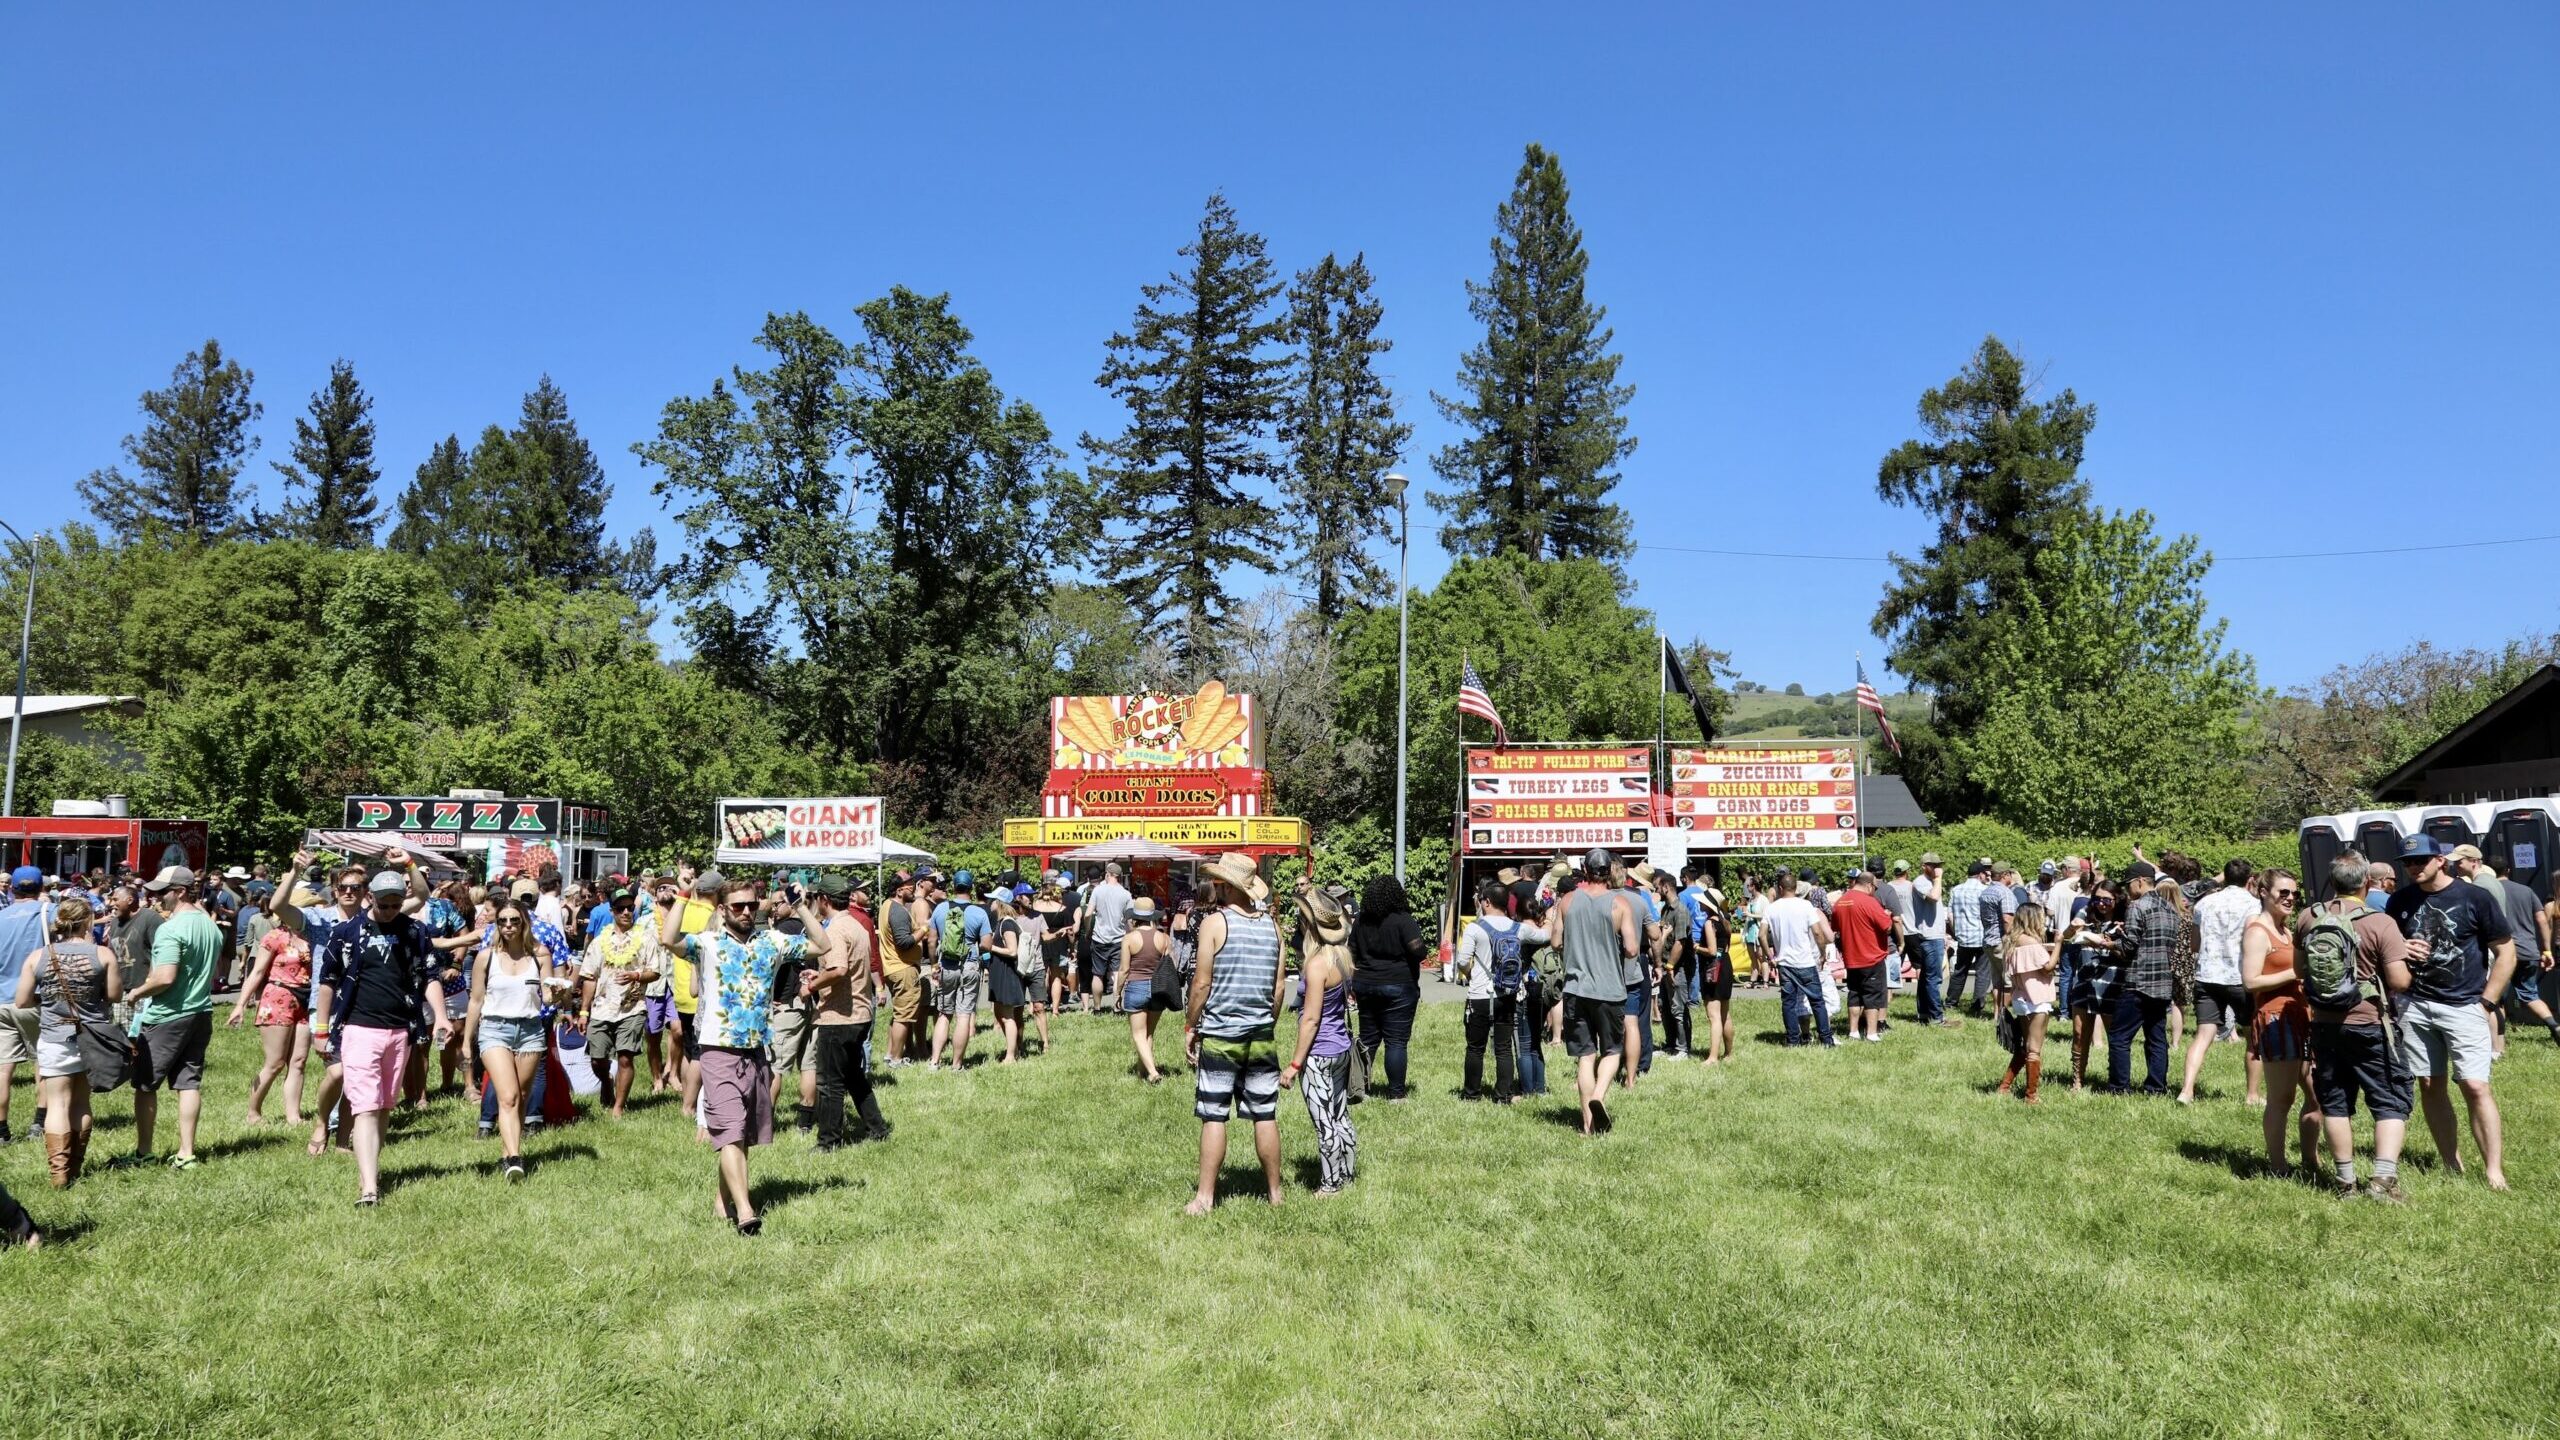 Boonville Beer Festival 2023 Dates Announced : Anderson Valley Brewing